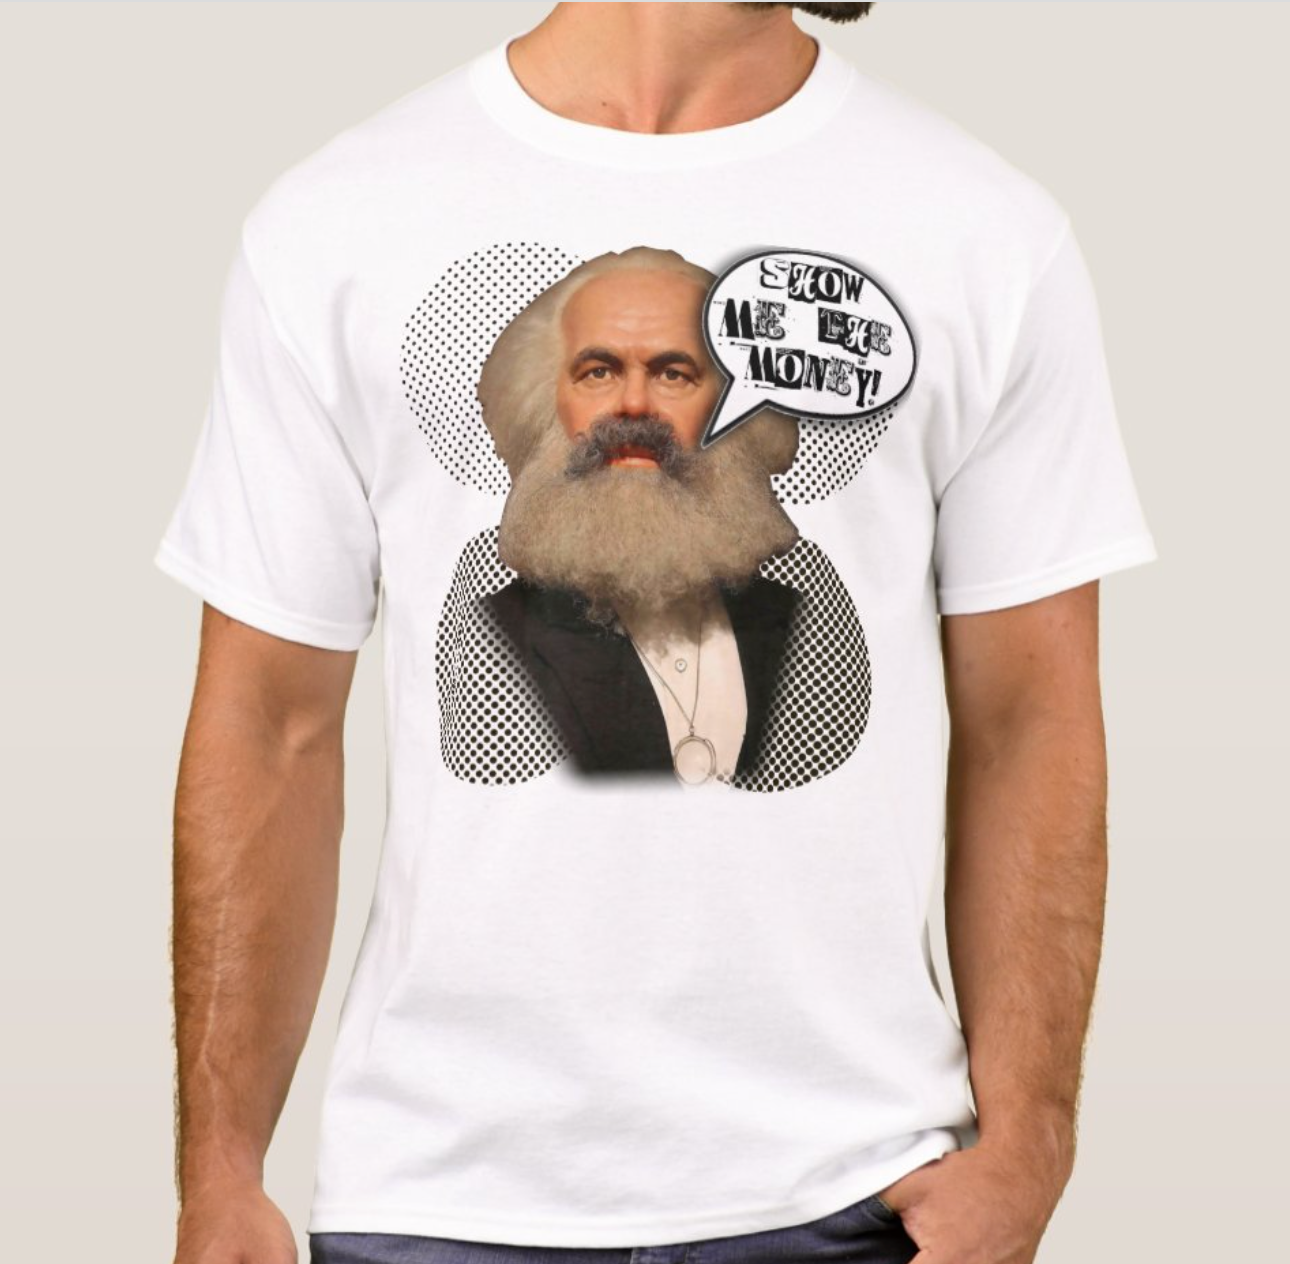 Windows Booksellers – Marx, Show Me the Money t-shirt